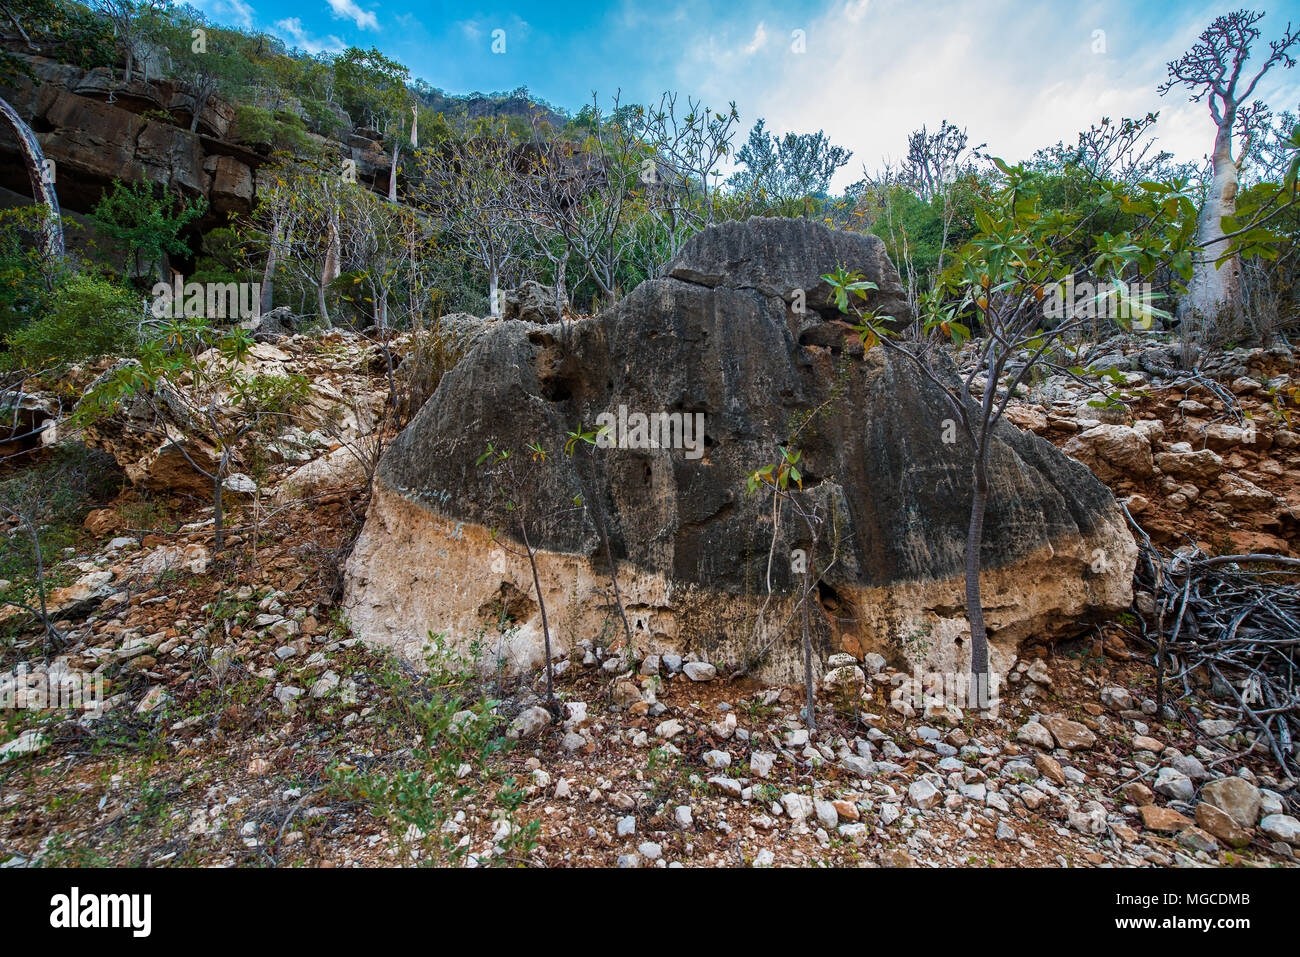 Stone and rock formations on the Socotra Island, Yemen Stock Photo